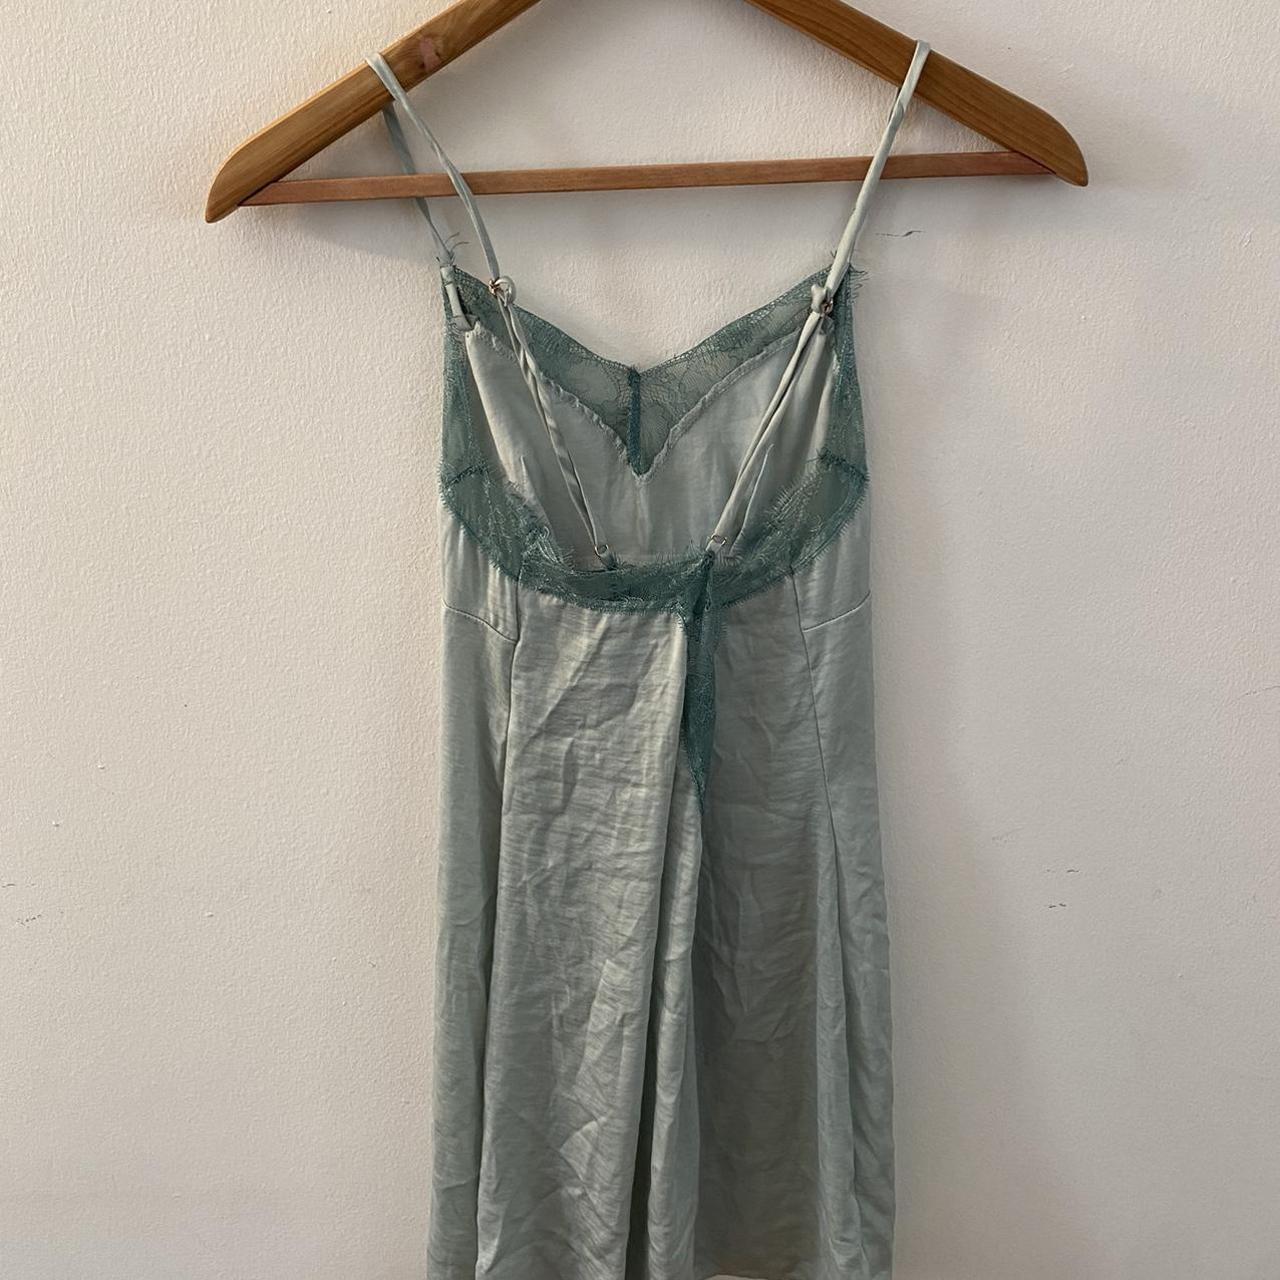 Product Image 2 - Light blue/green slip dress with